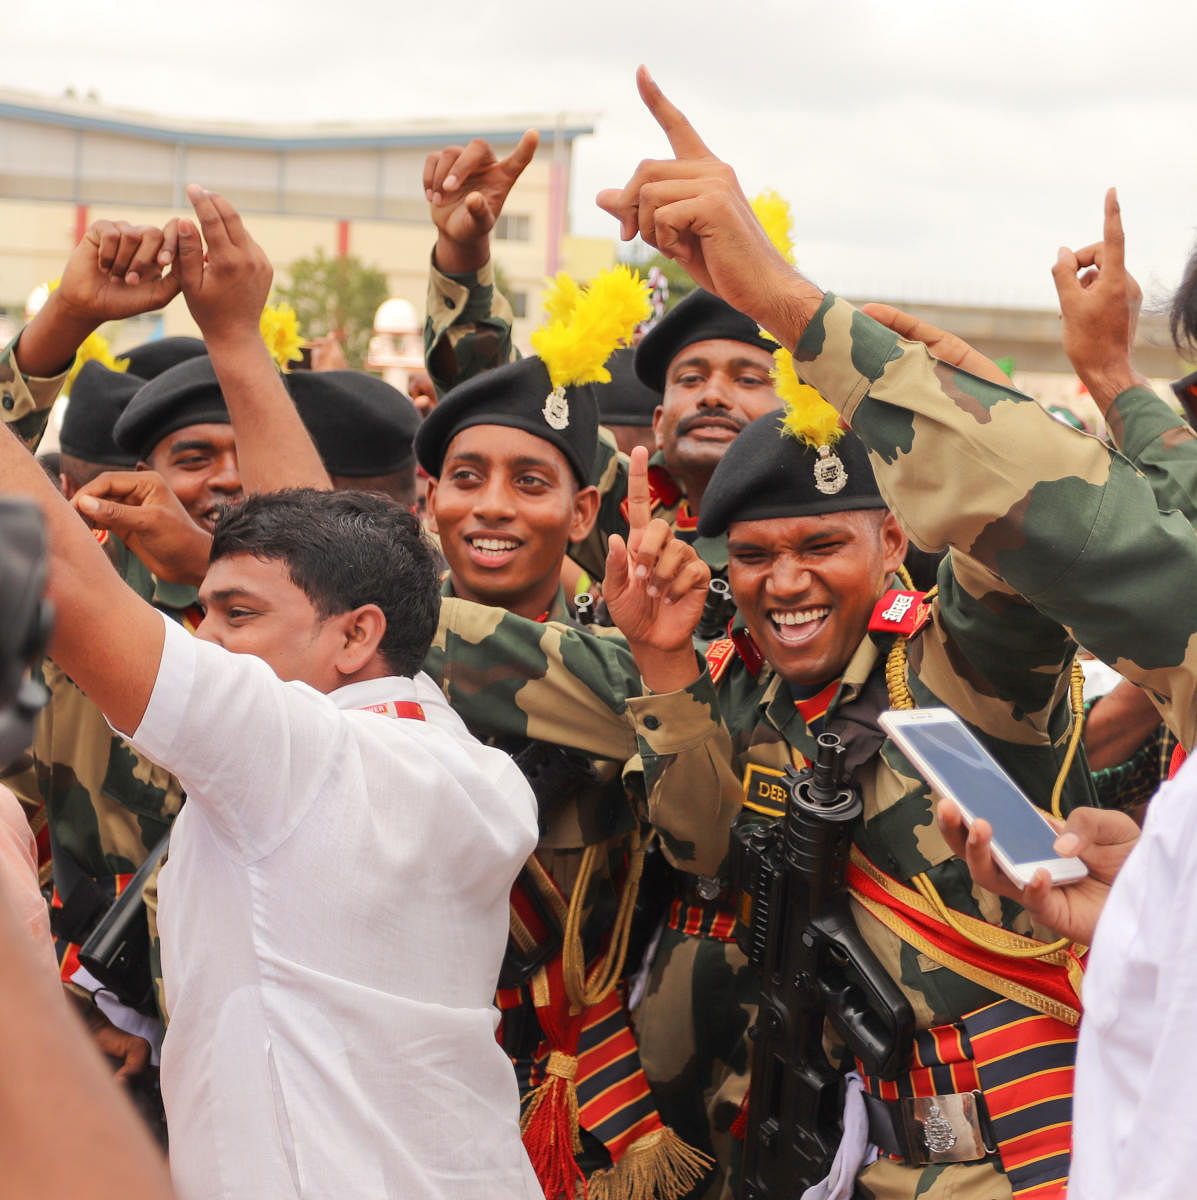 Members of Border Security Force celebrate after winning a trophy for best march-past during the Independence Day celebrations at Field Marshal Manekshaw Parade grounds in Bengaluru on August 15, 2019.